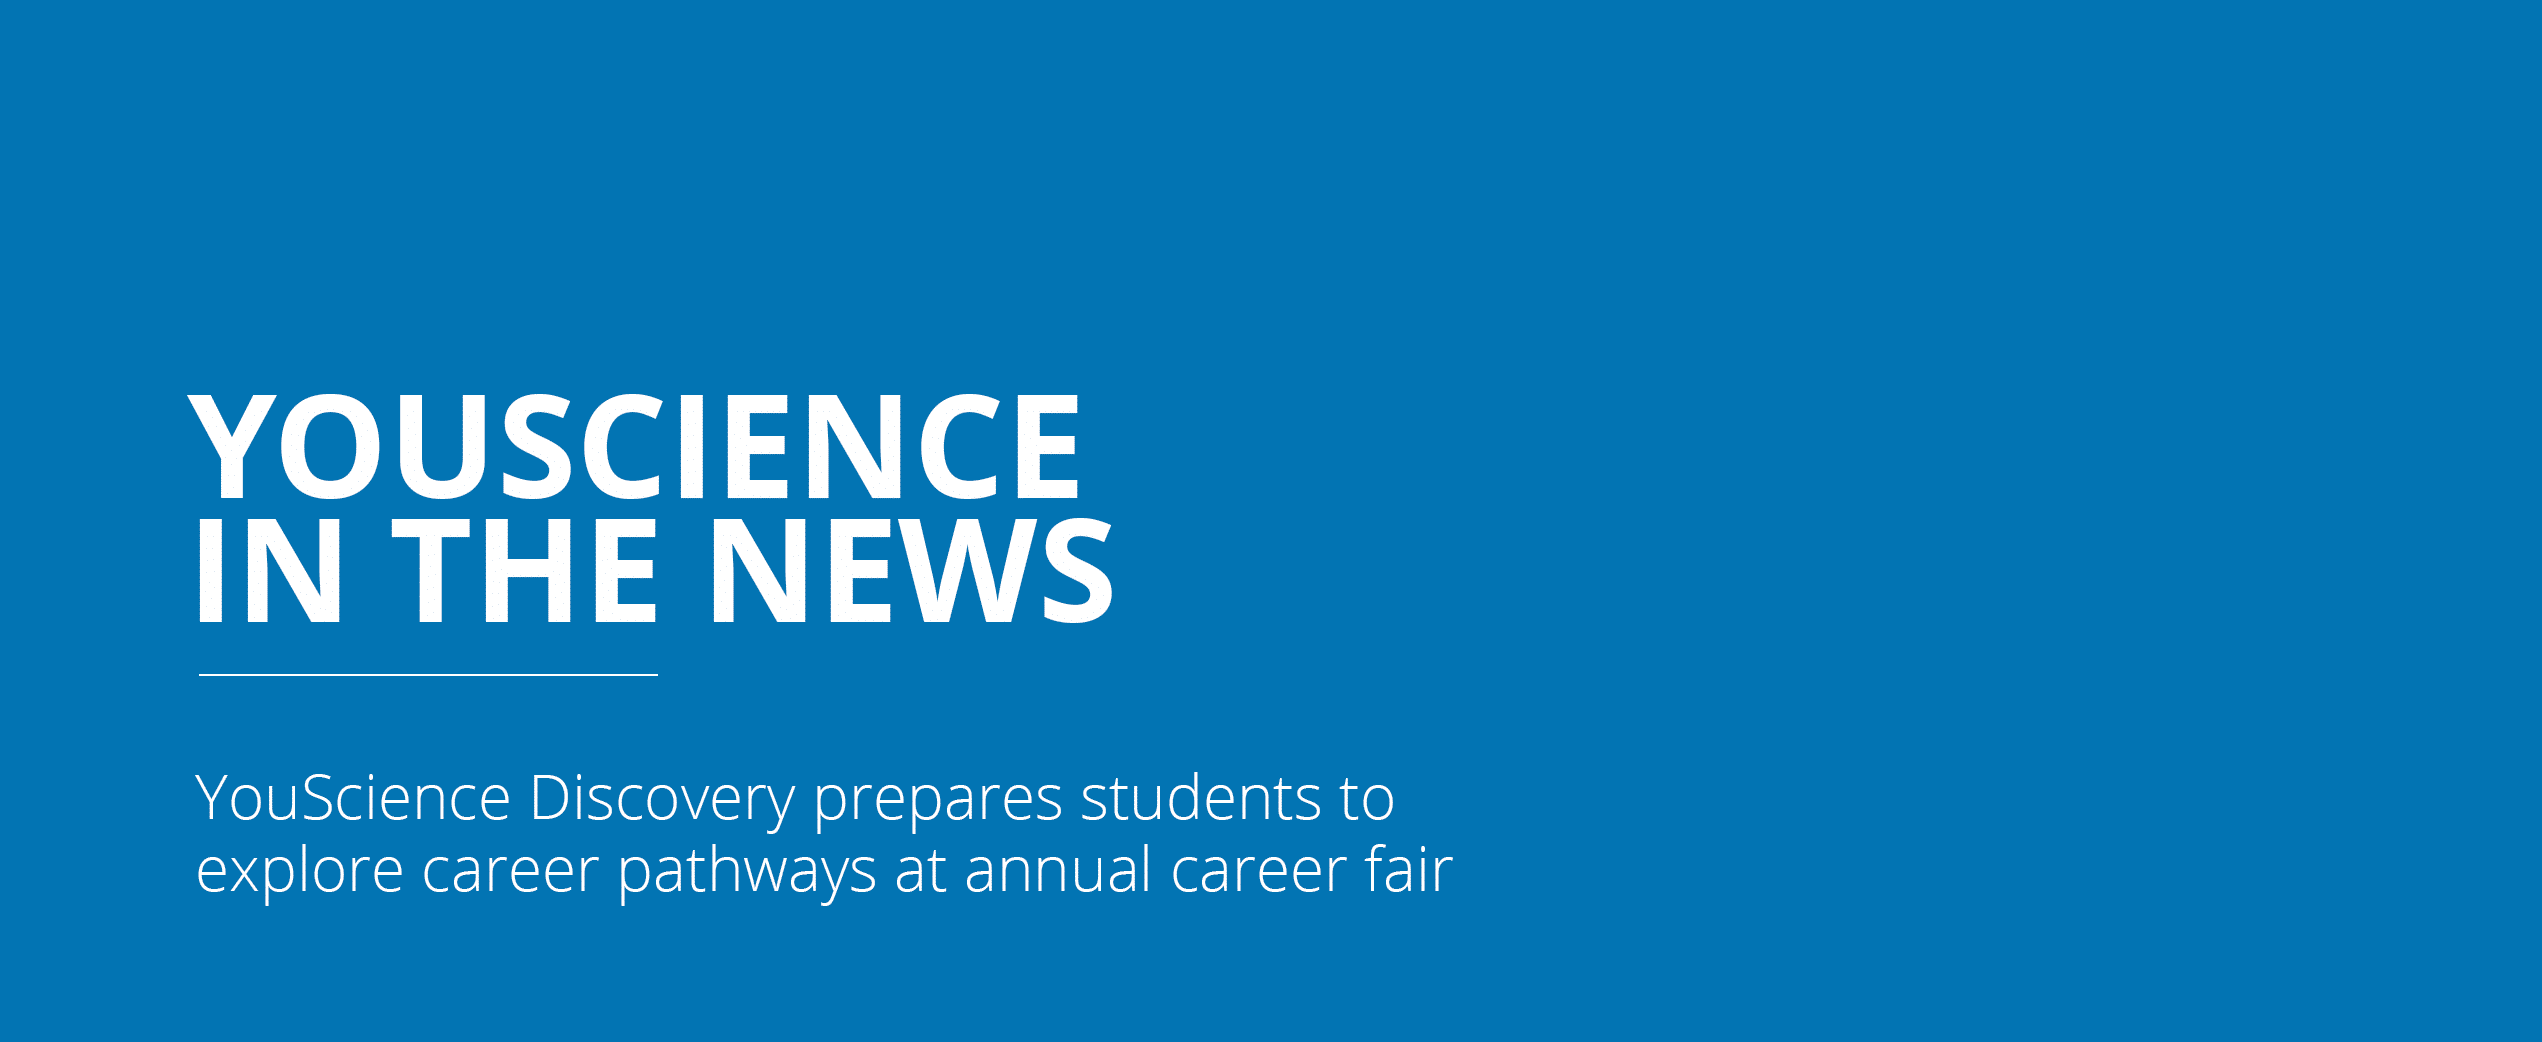 YouScience Discovery prepares students to explore career pathways at annual Nashville Public Schools career fair